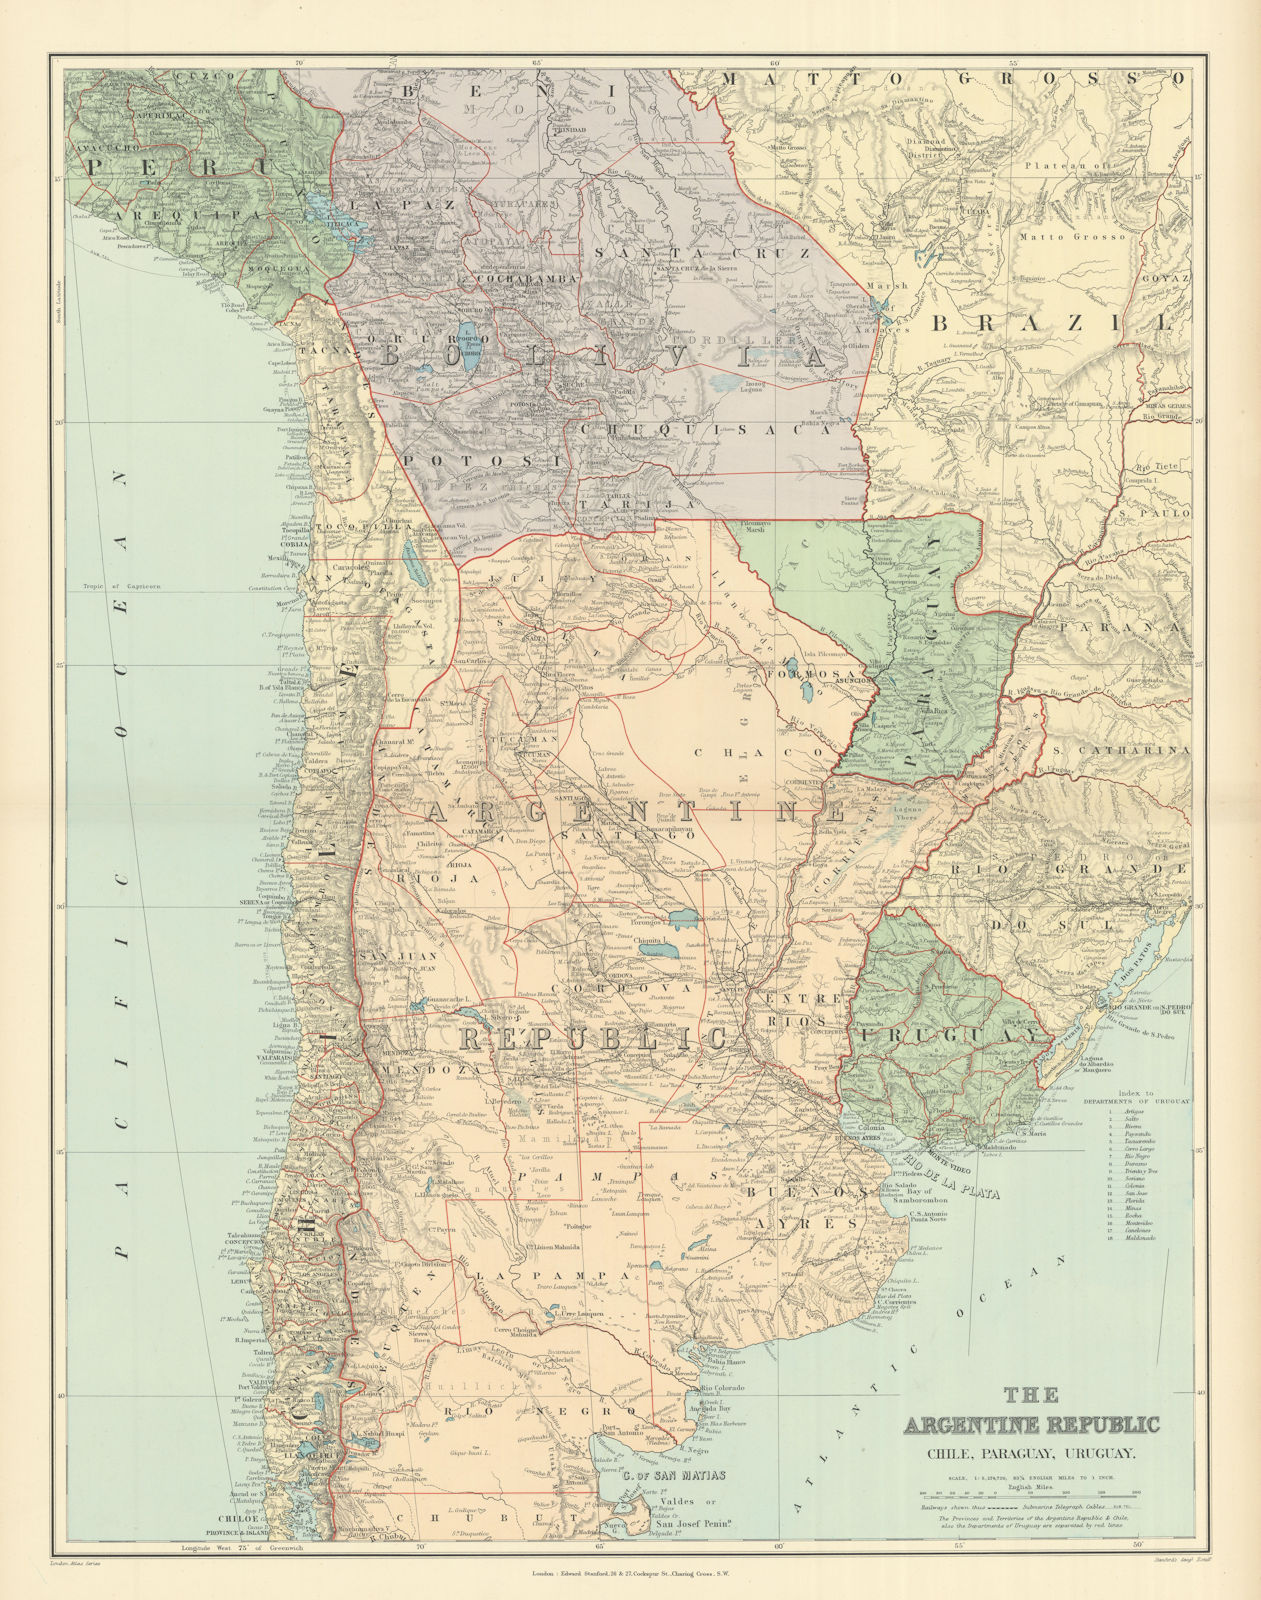 Associate Product Argentine Republic, Chile, Paraguay & Uruguay. South America. STANFORD 1894 map